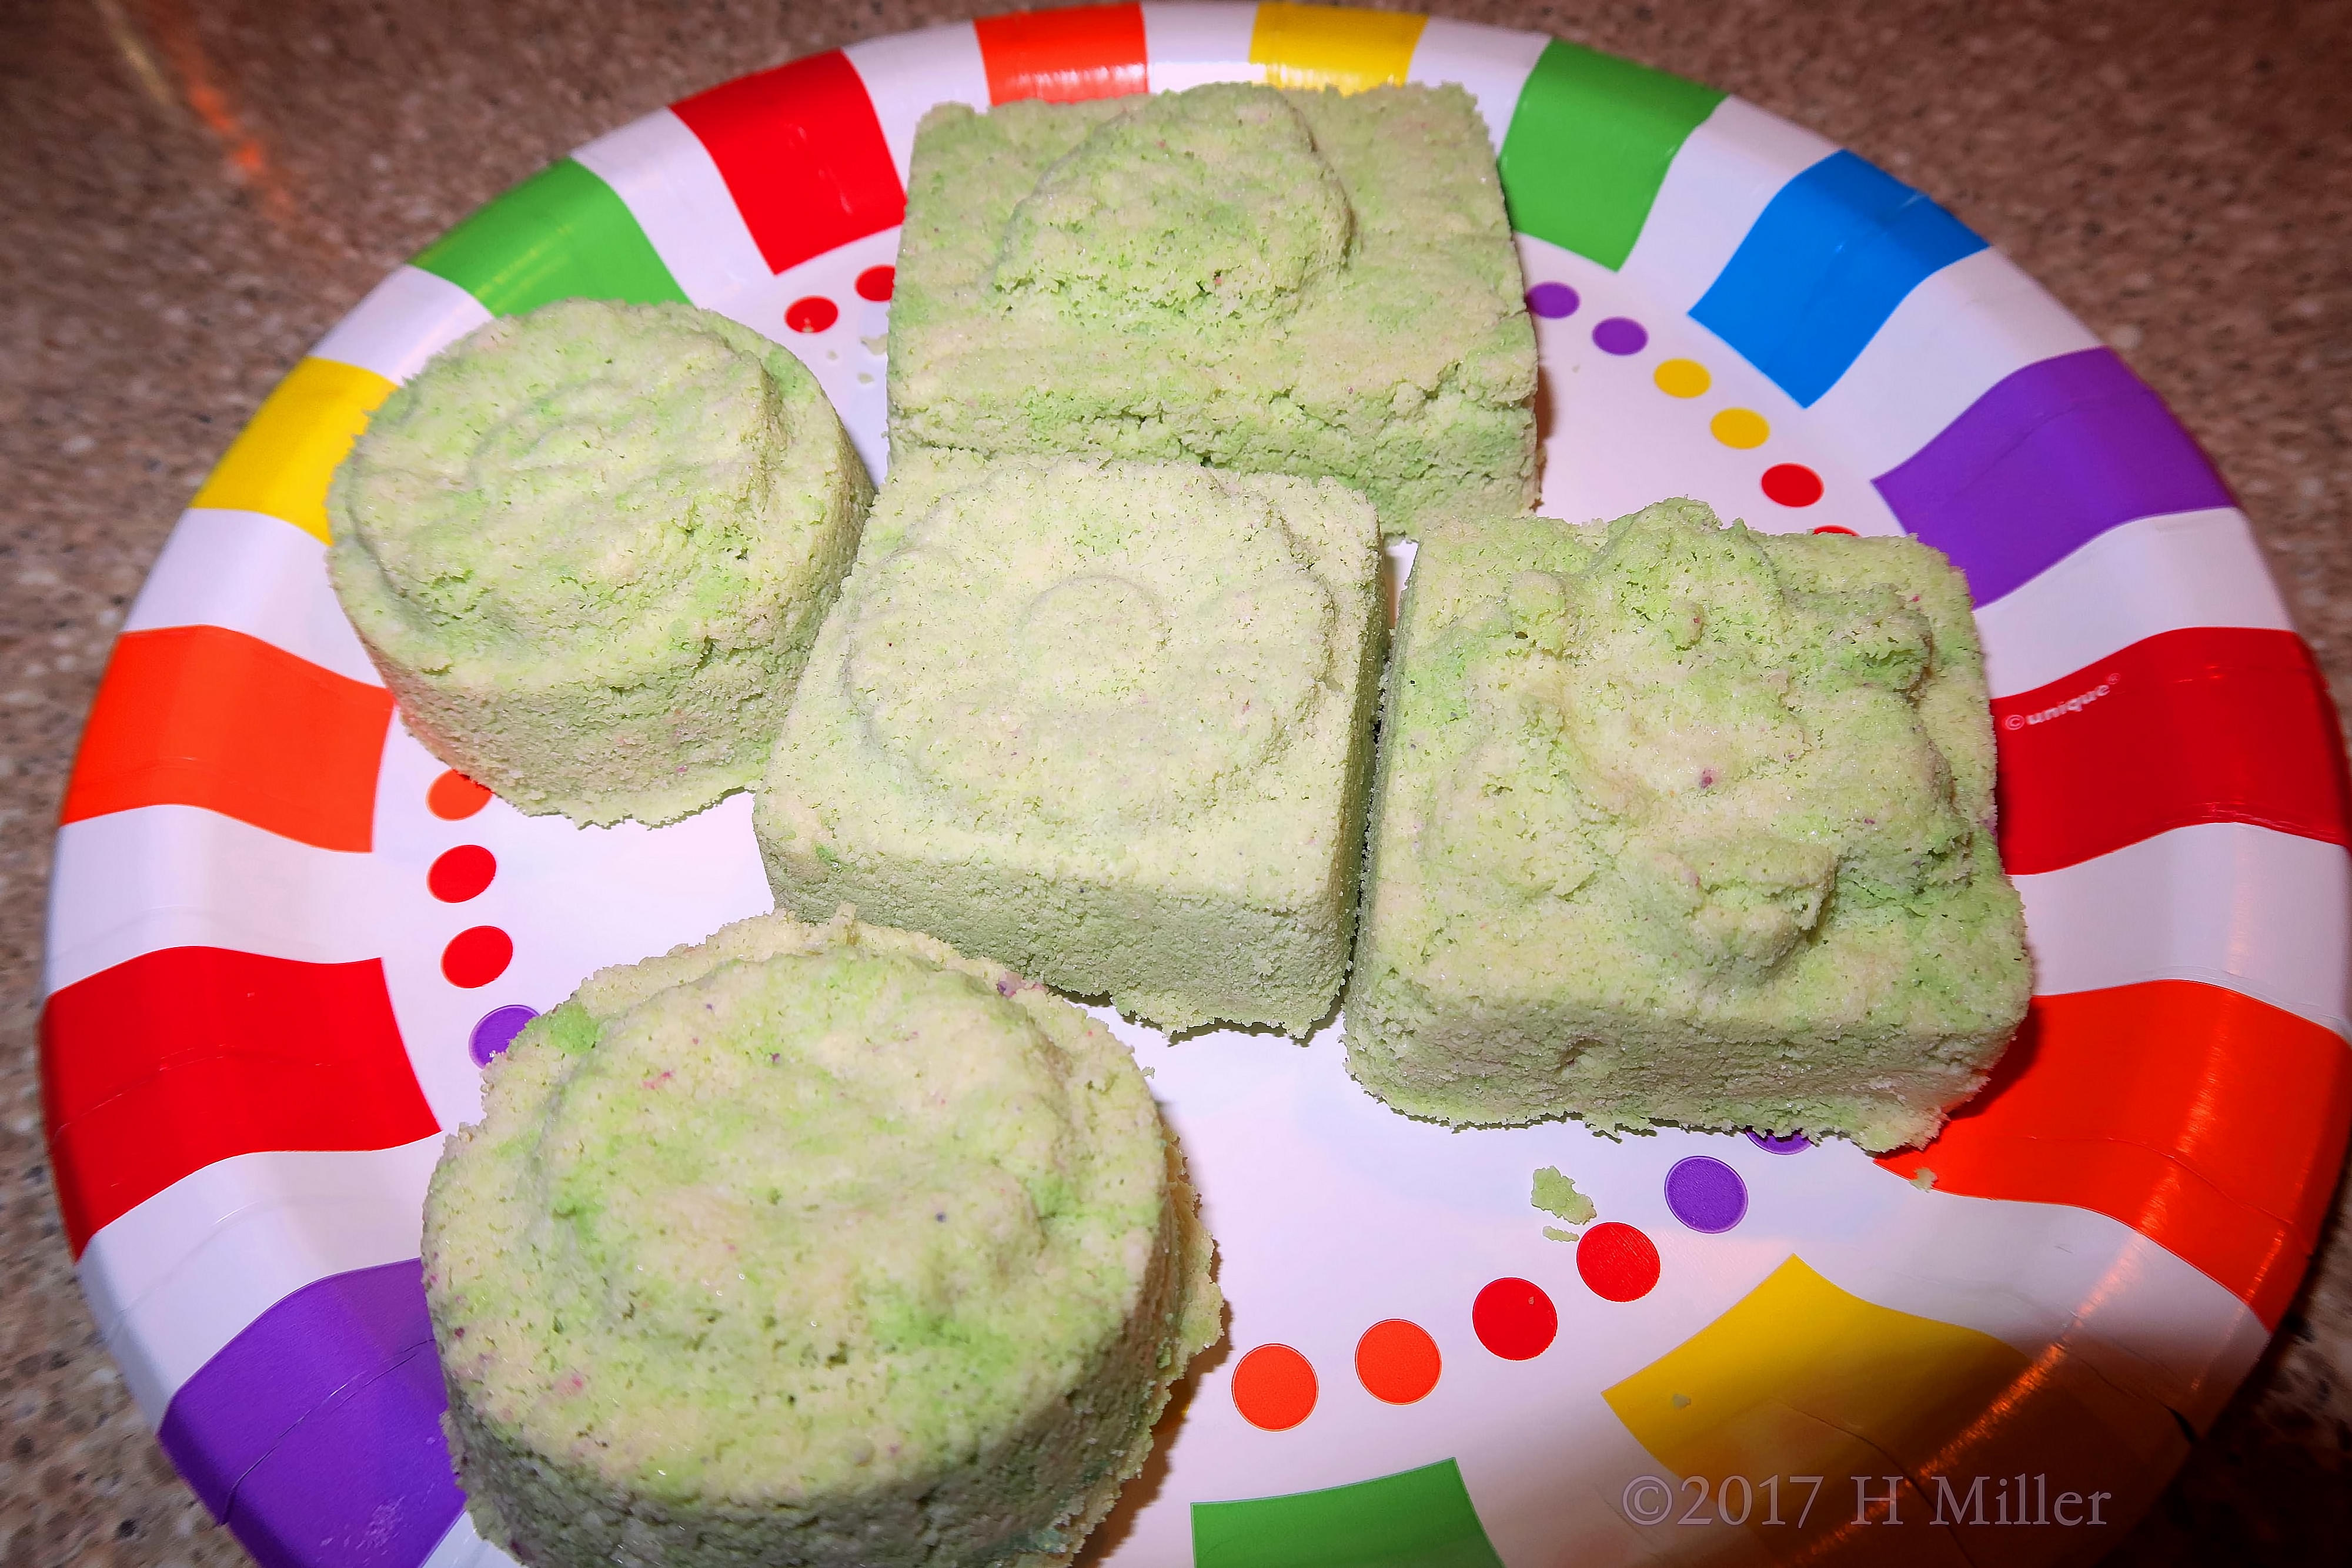 A Close View Of The Fizzy Bath Bomb Challenge Kids Crafts! 4